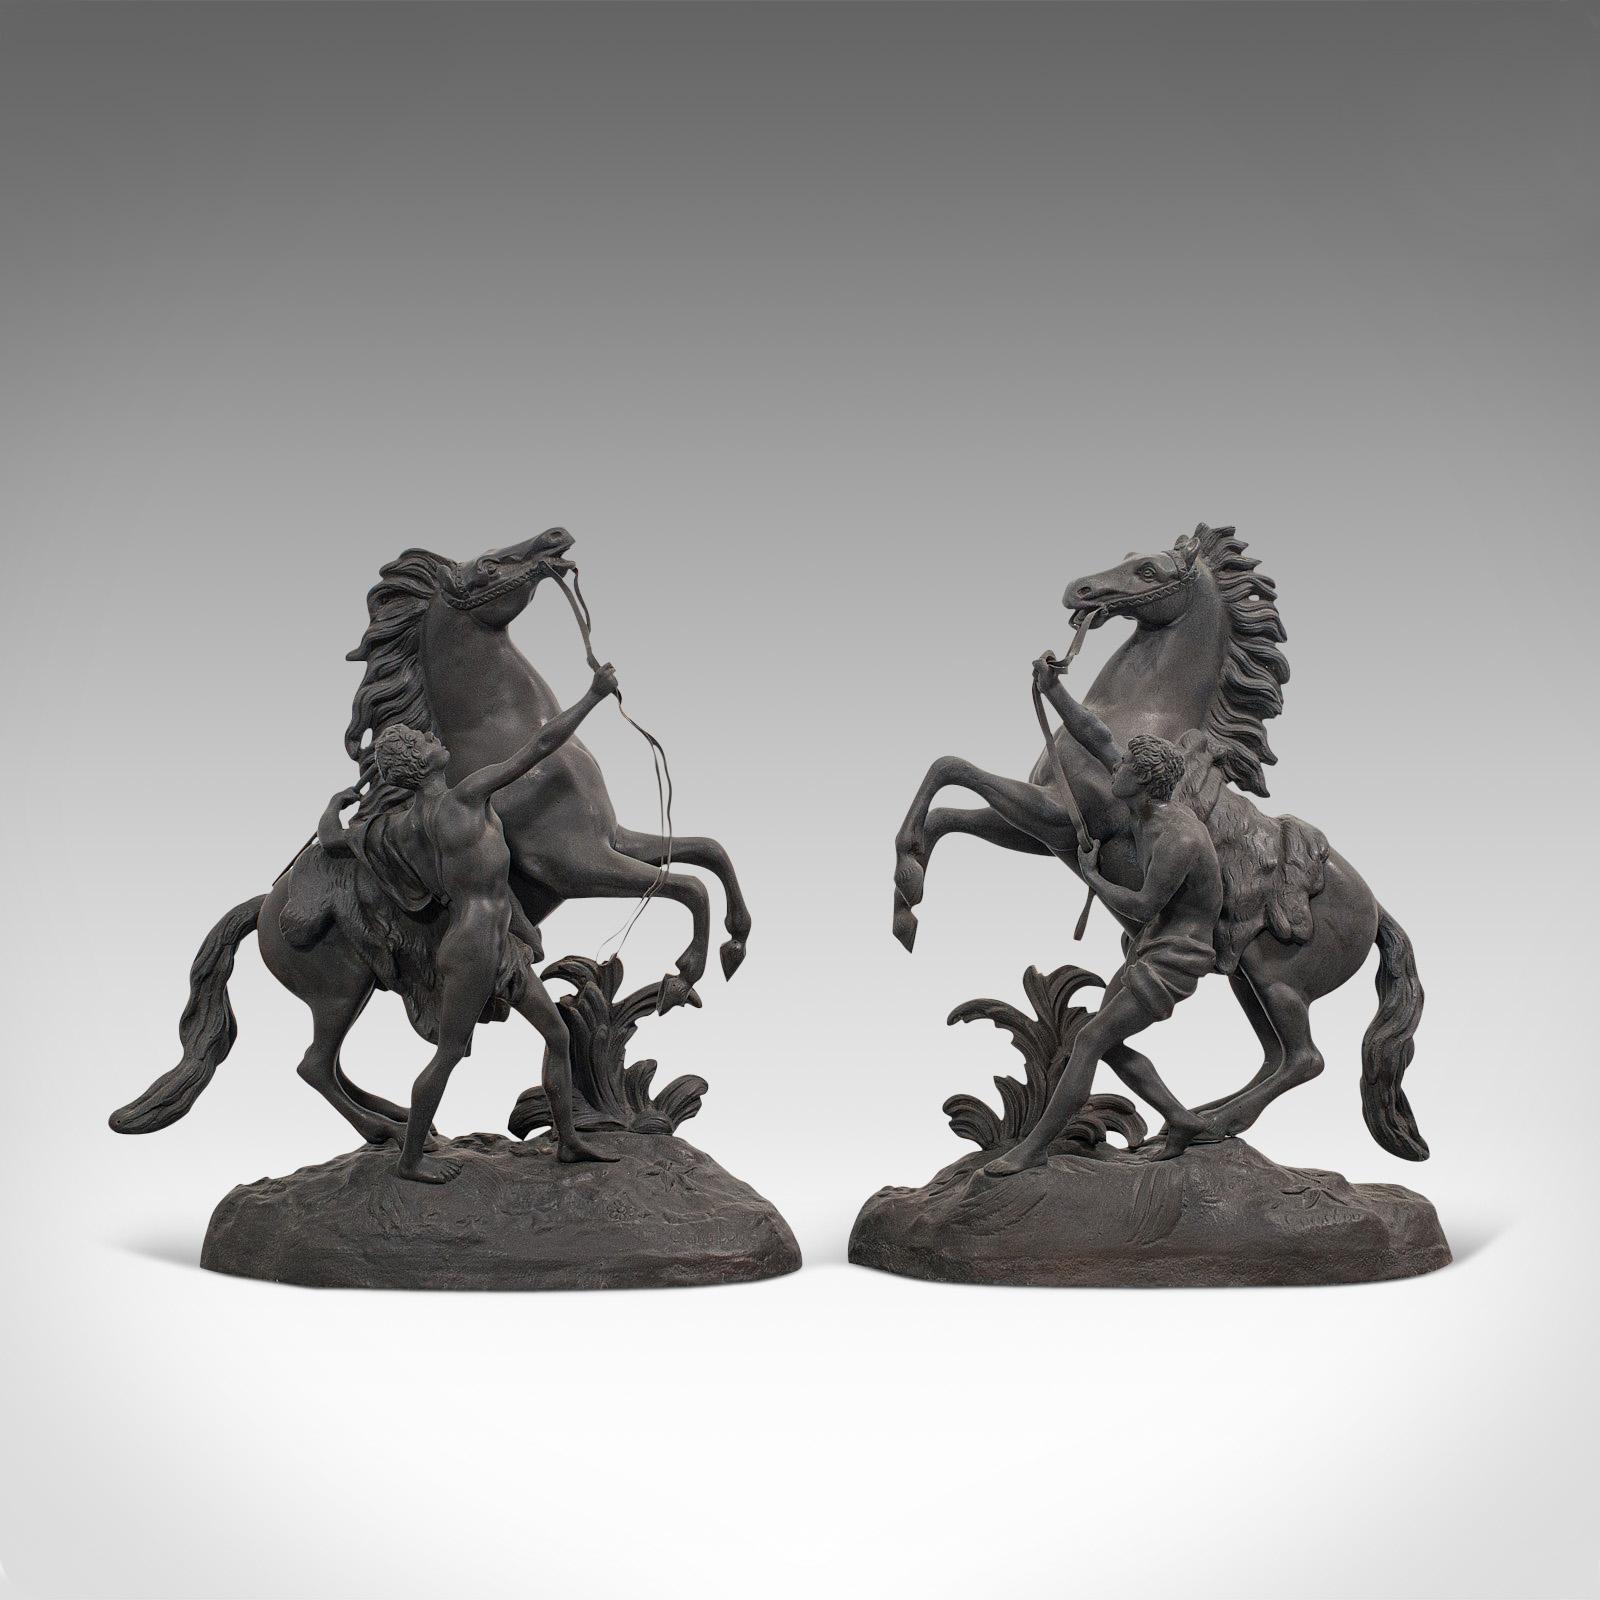 This is a dashing, collectible antique pair of Marly horses. A French, bronze equine statue in the manner of Guillaume Coustou (1677-1746), dating to the late 19th century, circa 1900.

Excellent representations of the famous Marly horses, on